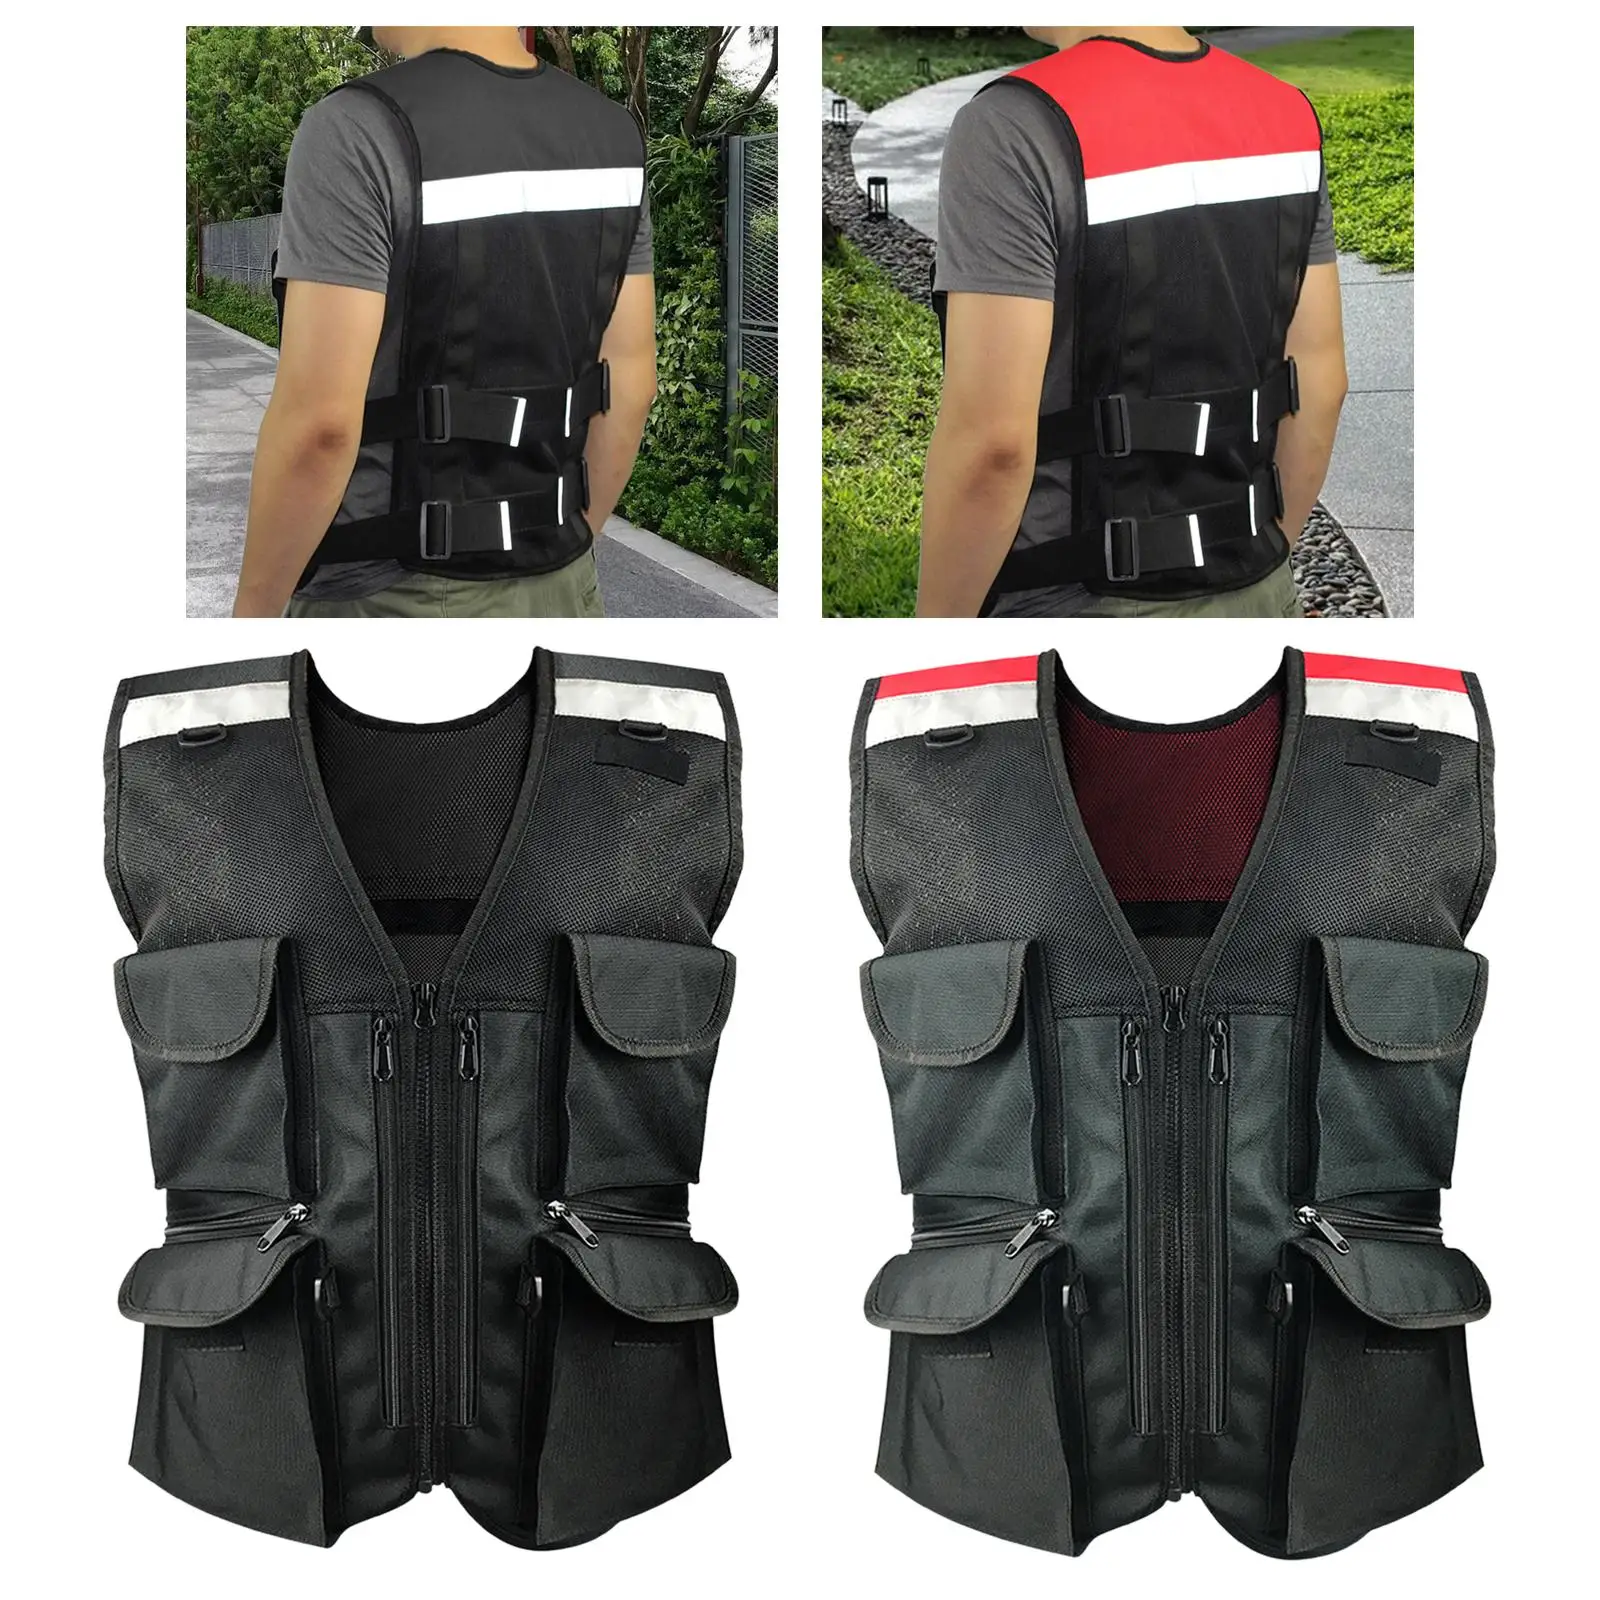 Reflective Safety Security Vest with Pockets Safety Clothing